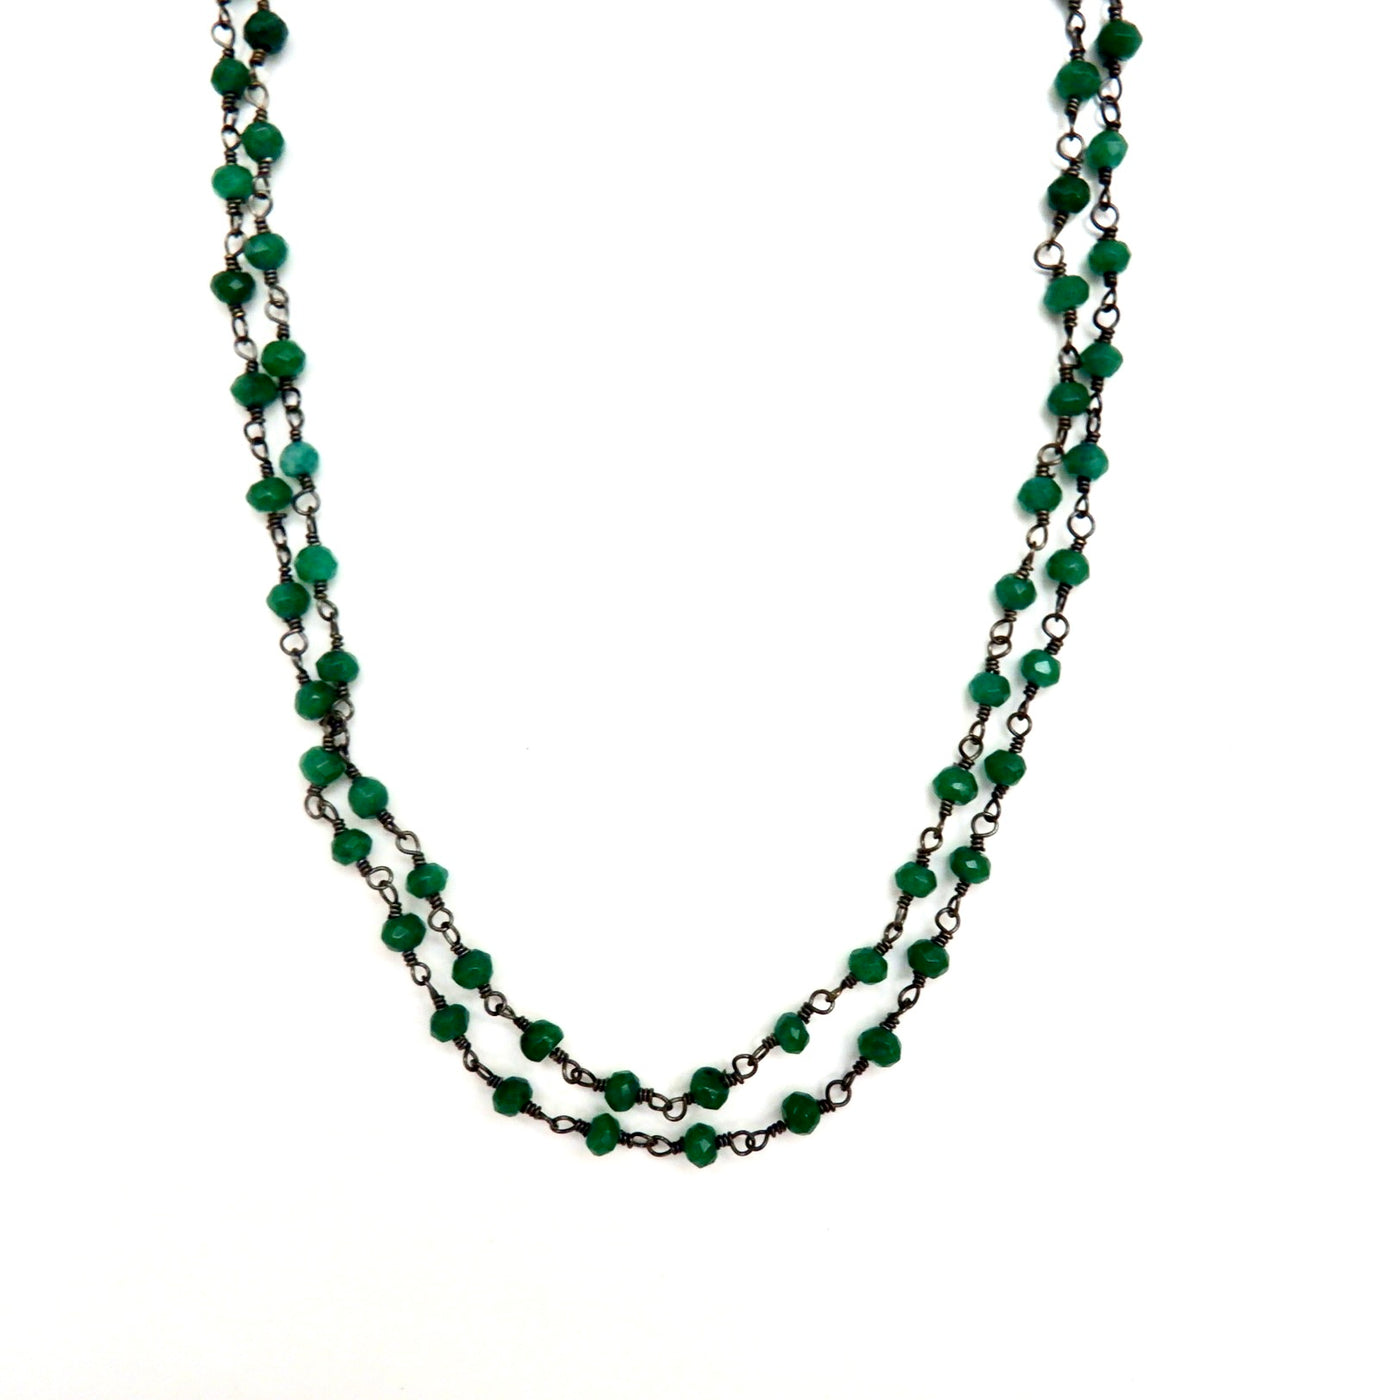 my long dainty jade chain necklace